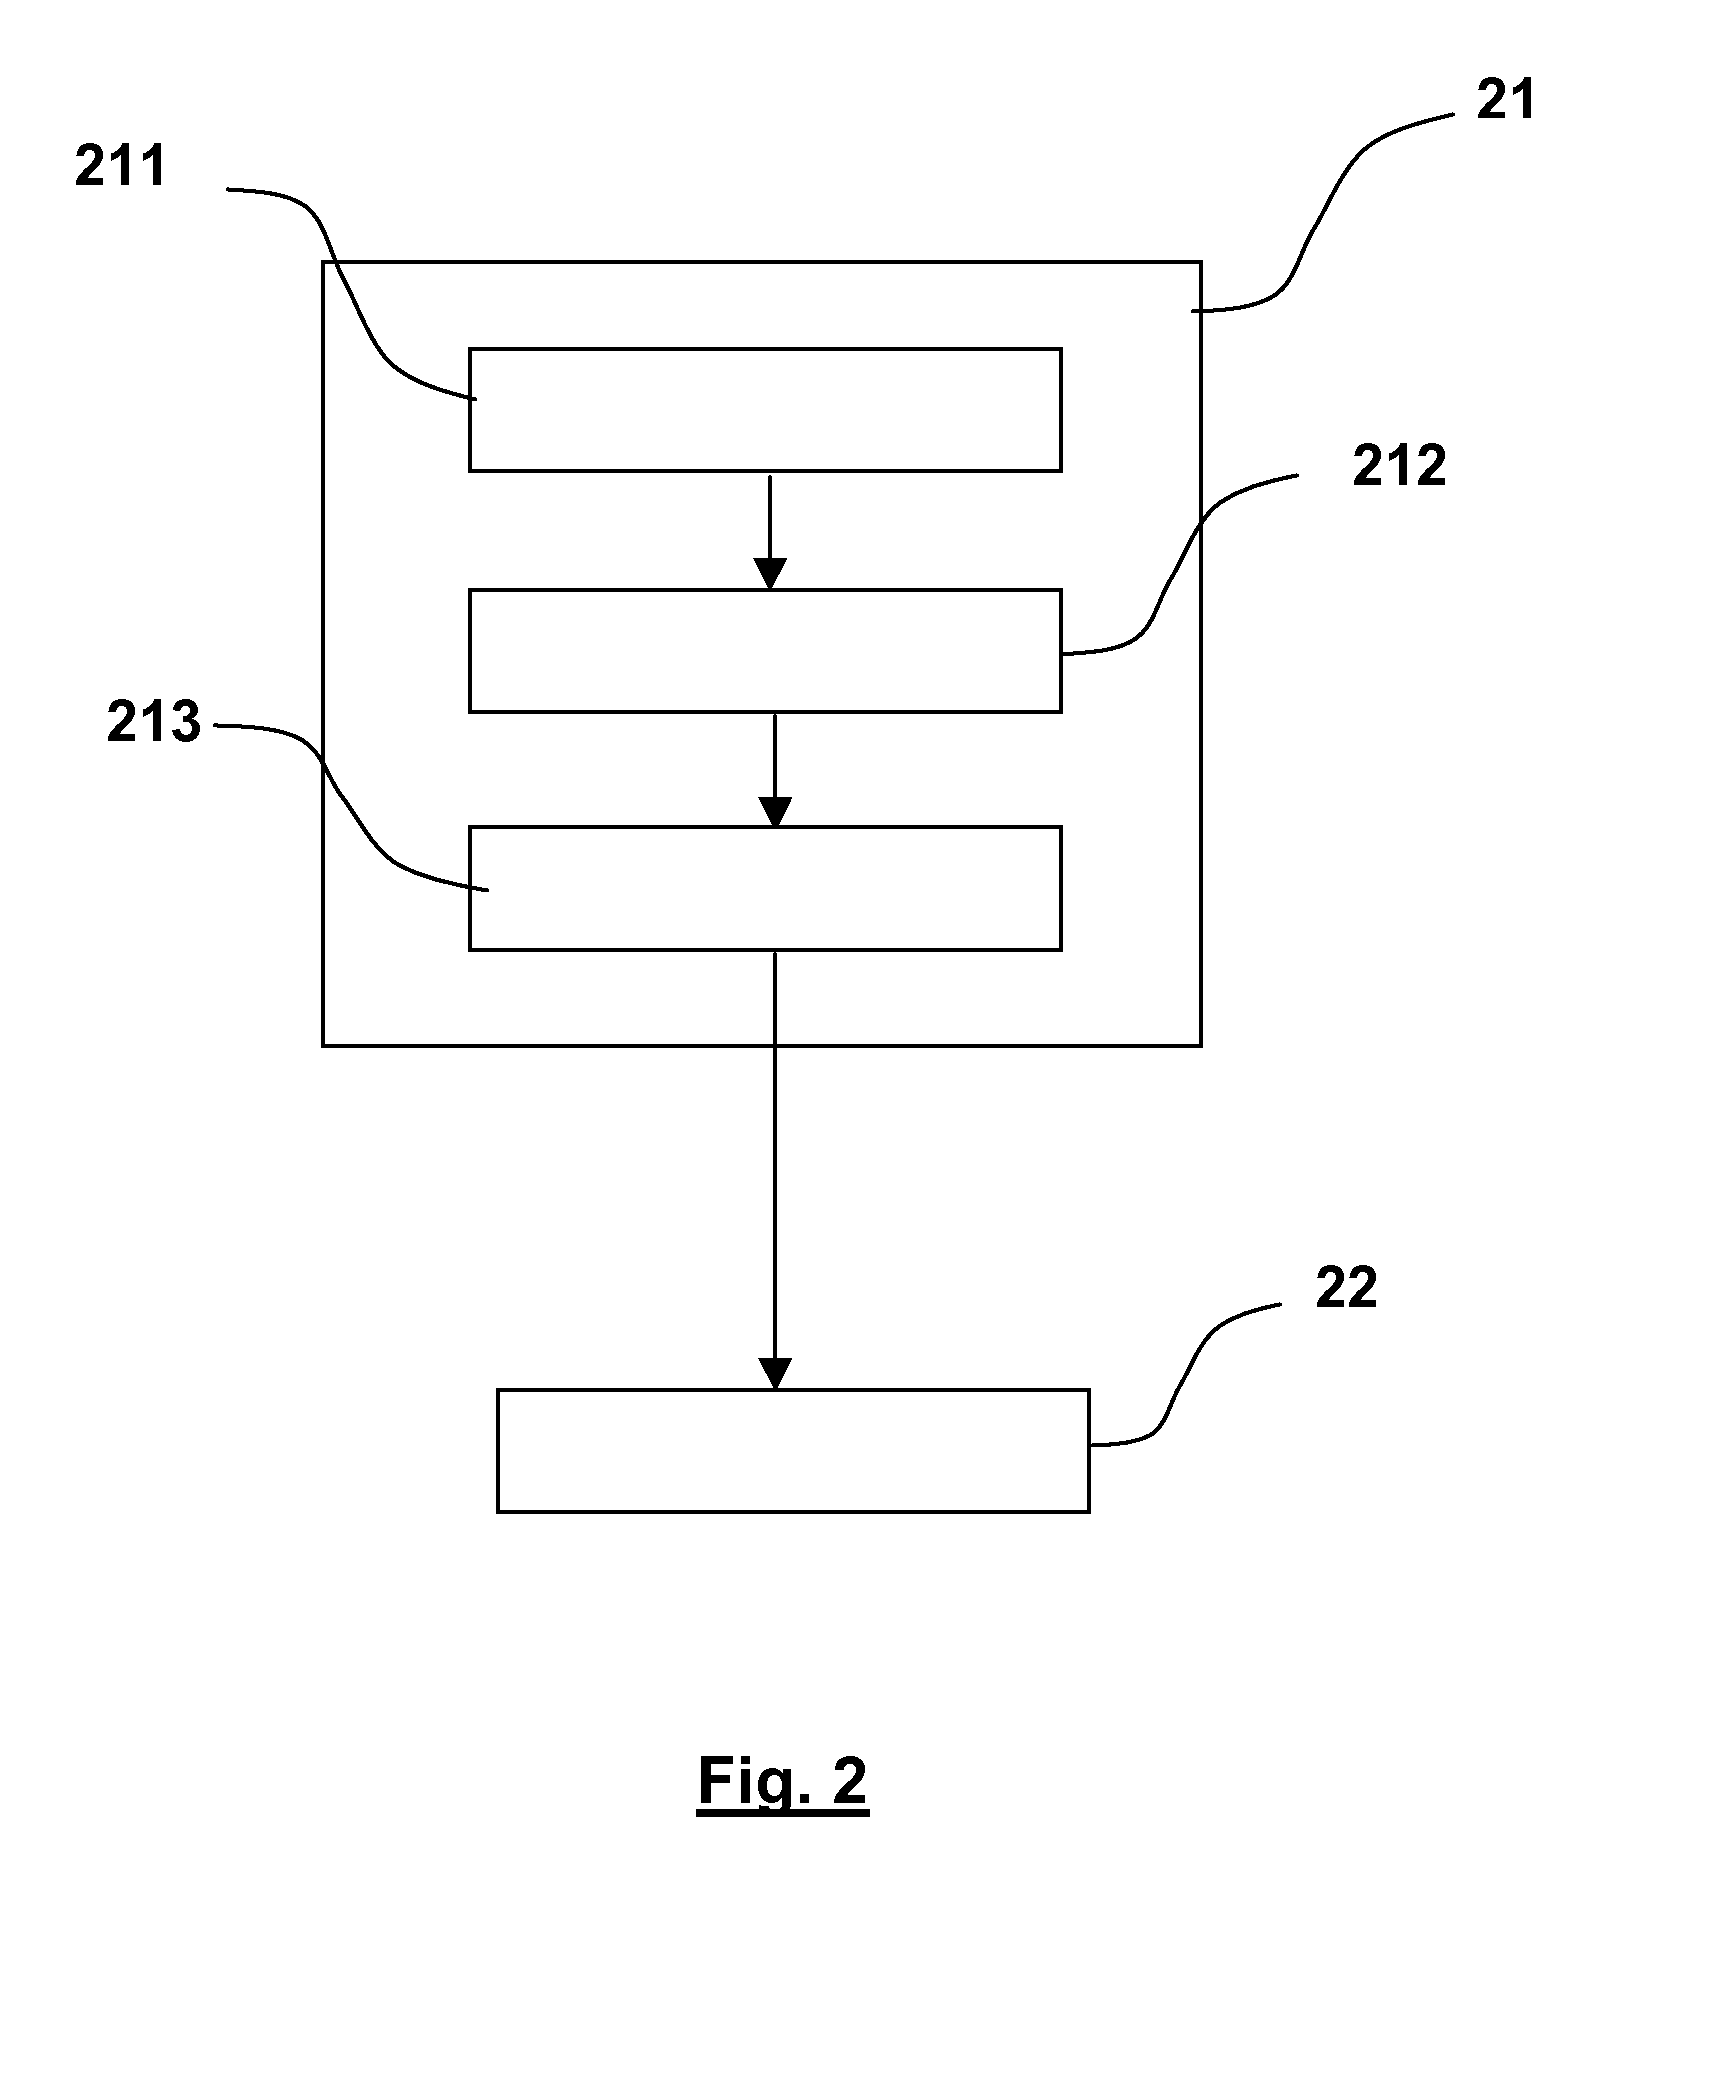 Method for Transmitting Information for a Collective Rendering of Information on Emotions